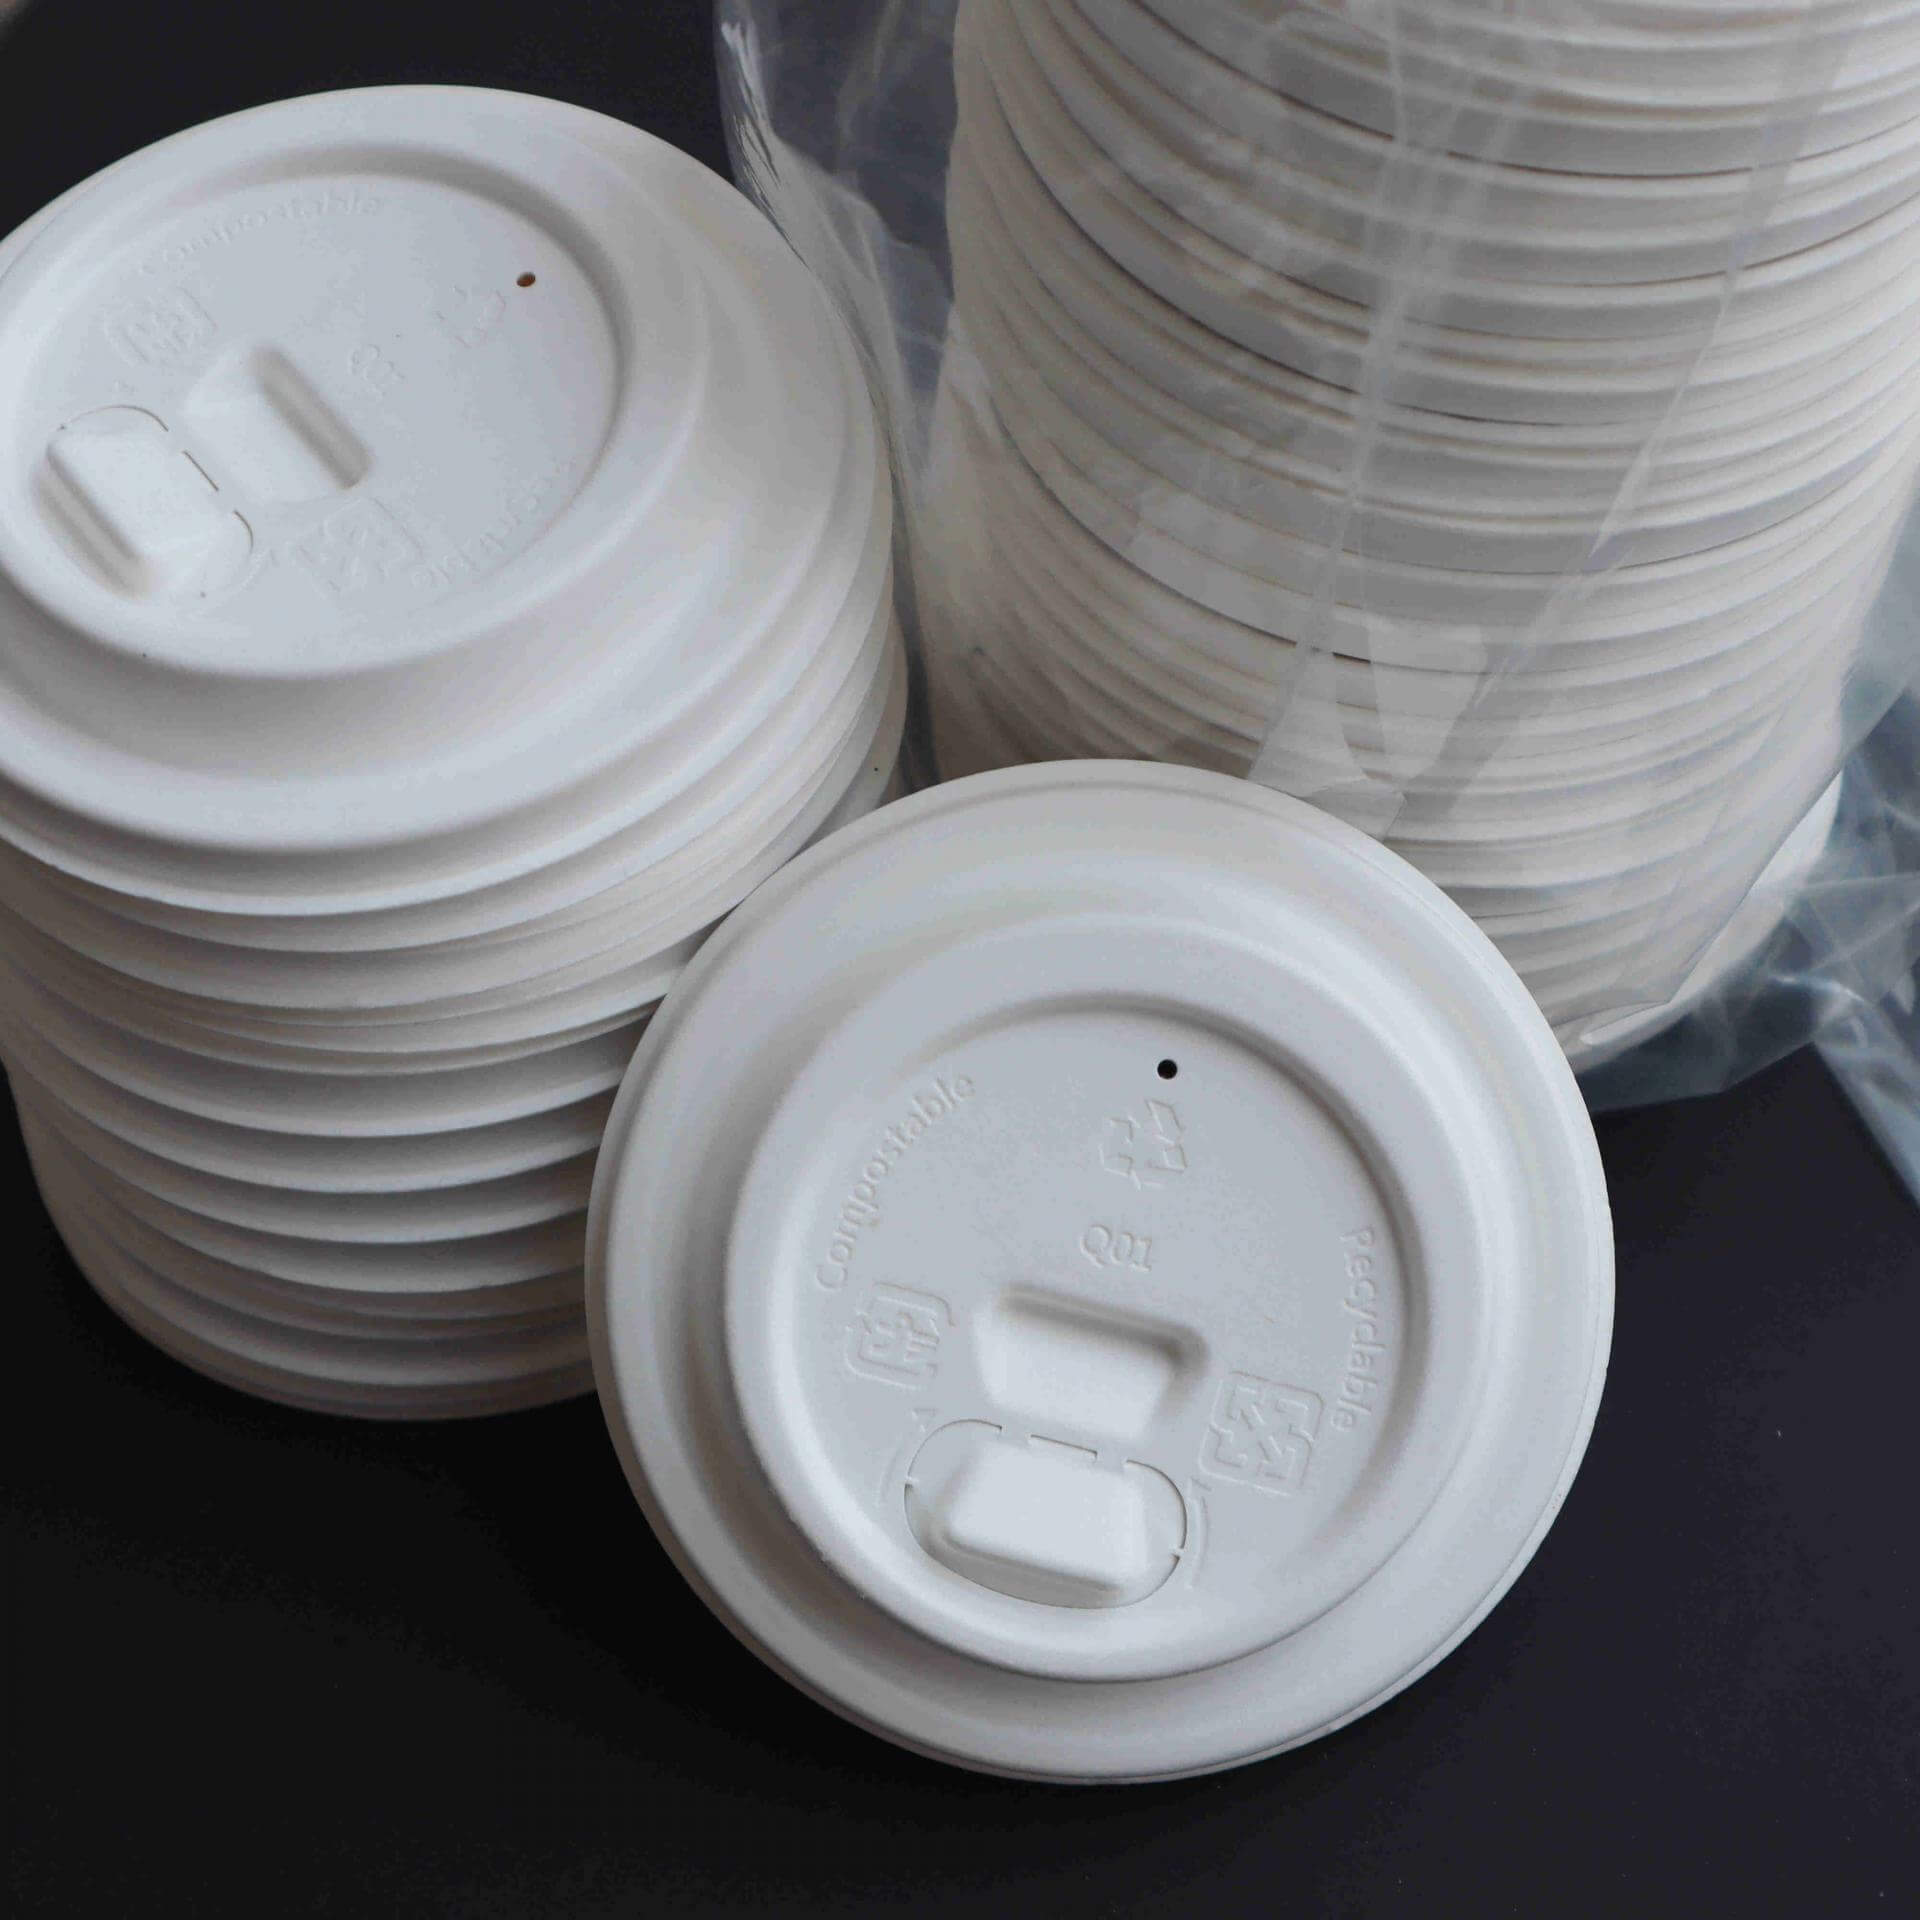 sugarcane 86.5mm biodegradable coffee cup lids